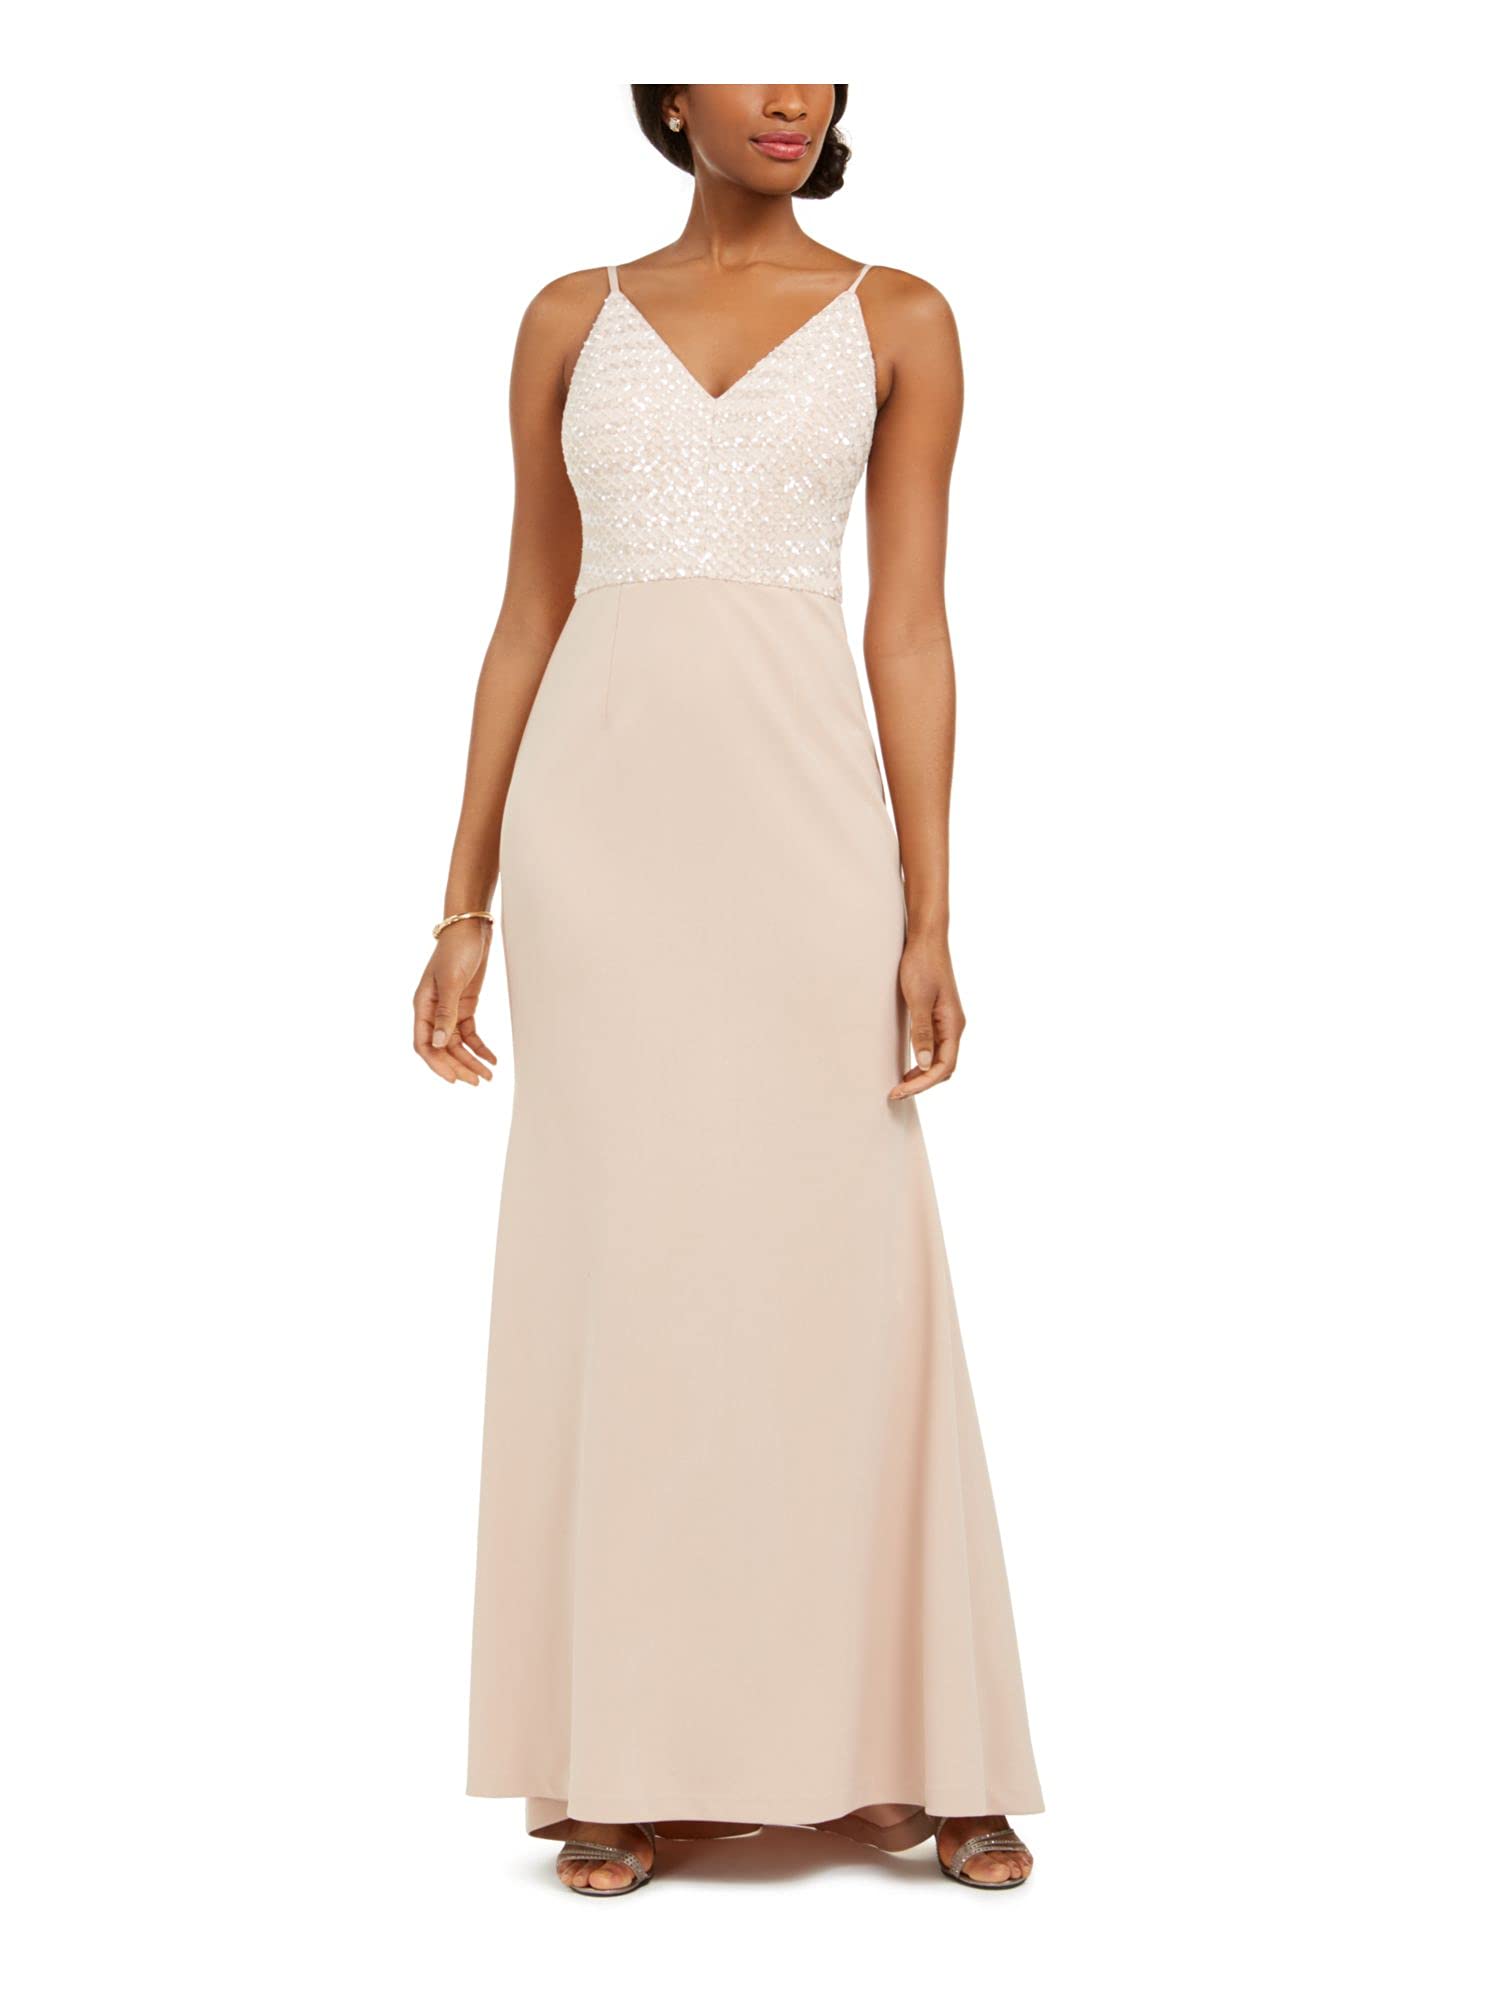 Vince Camuto Womens Pink Sequined Spaghetti Strap V Neck Full-Length Evening Fit + Flare Dress 8